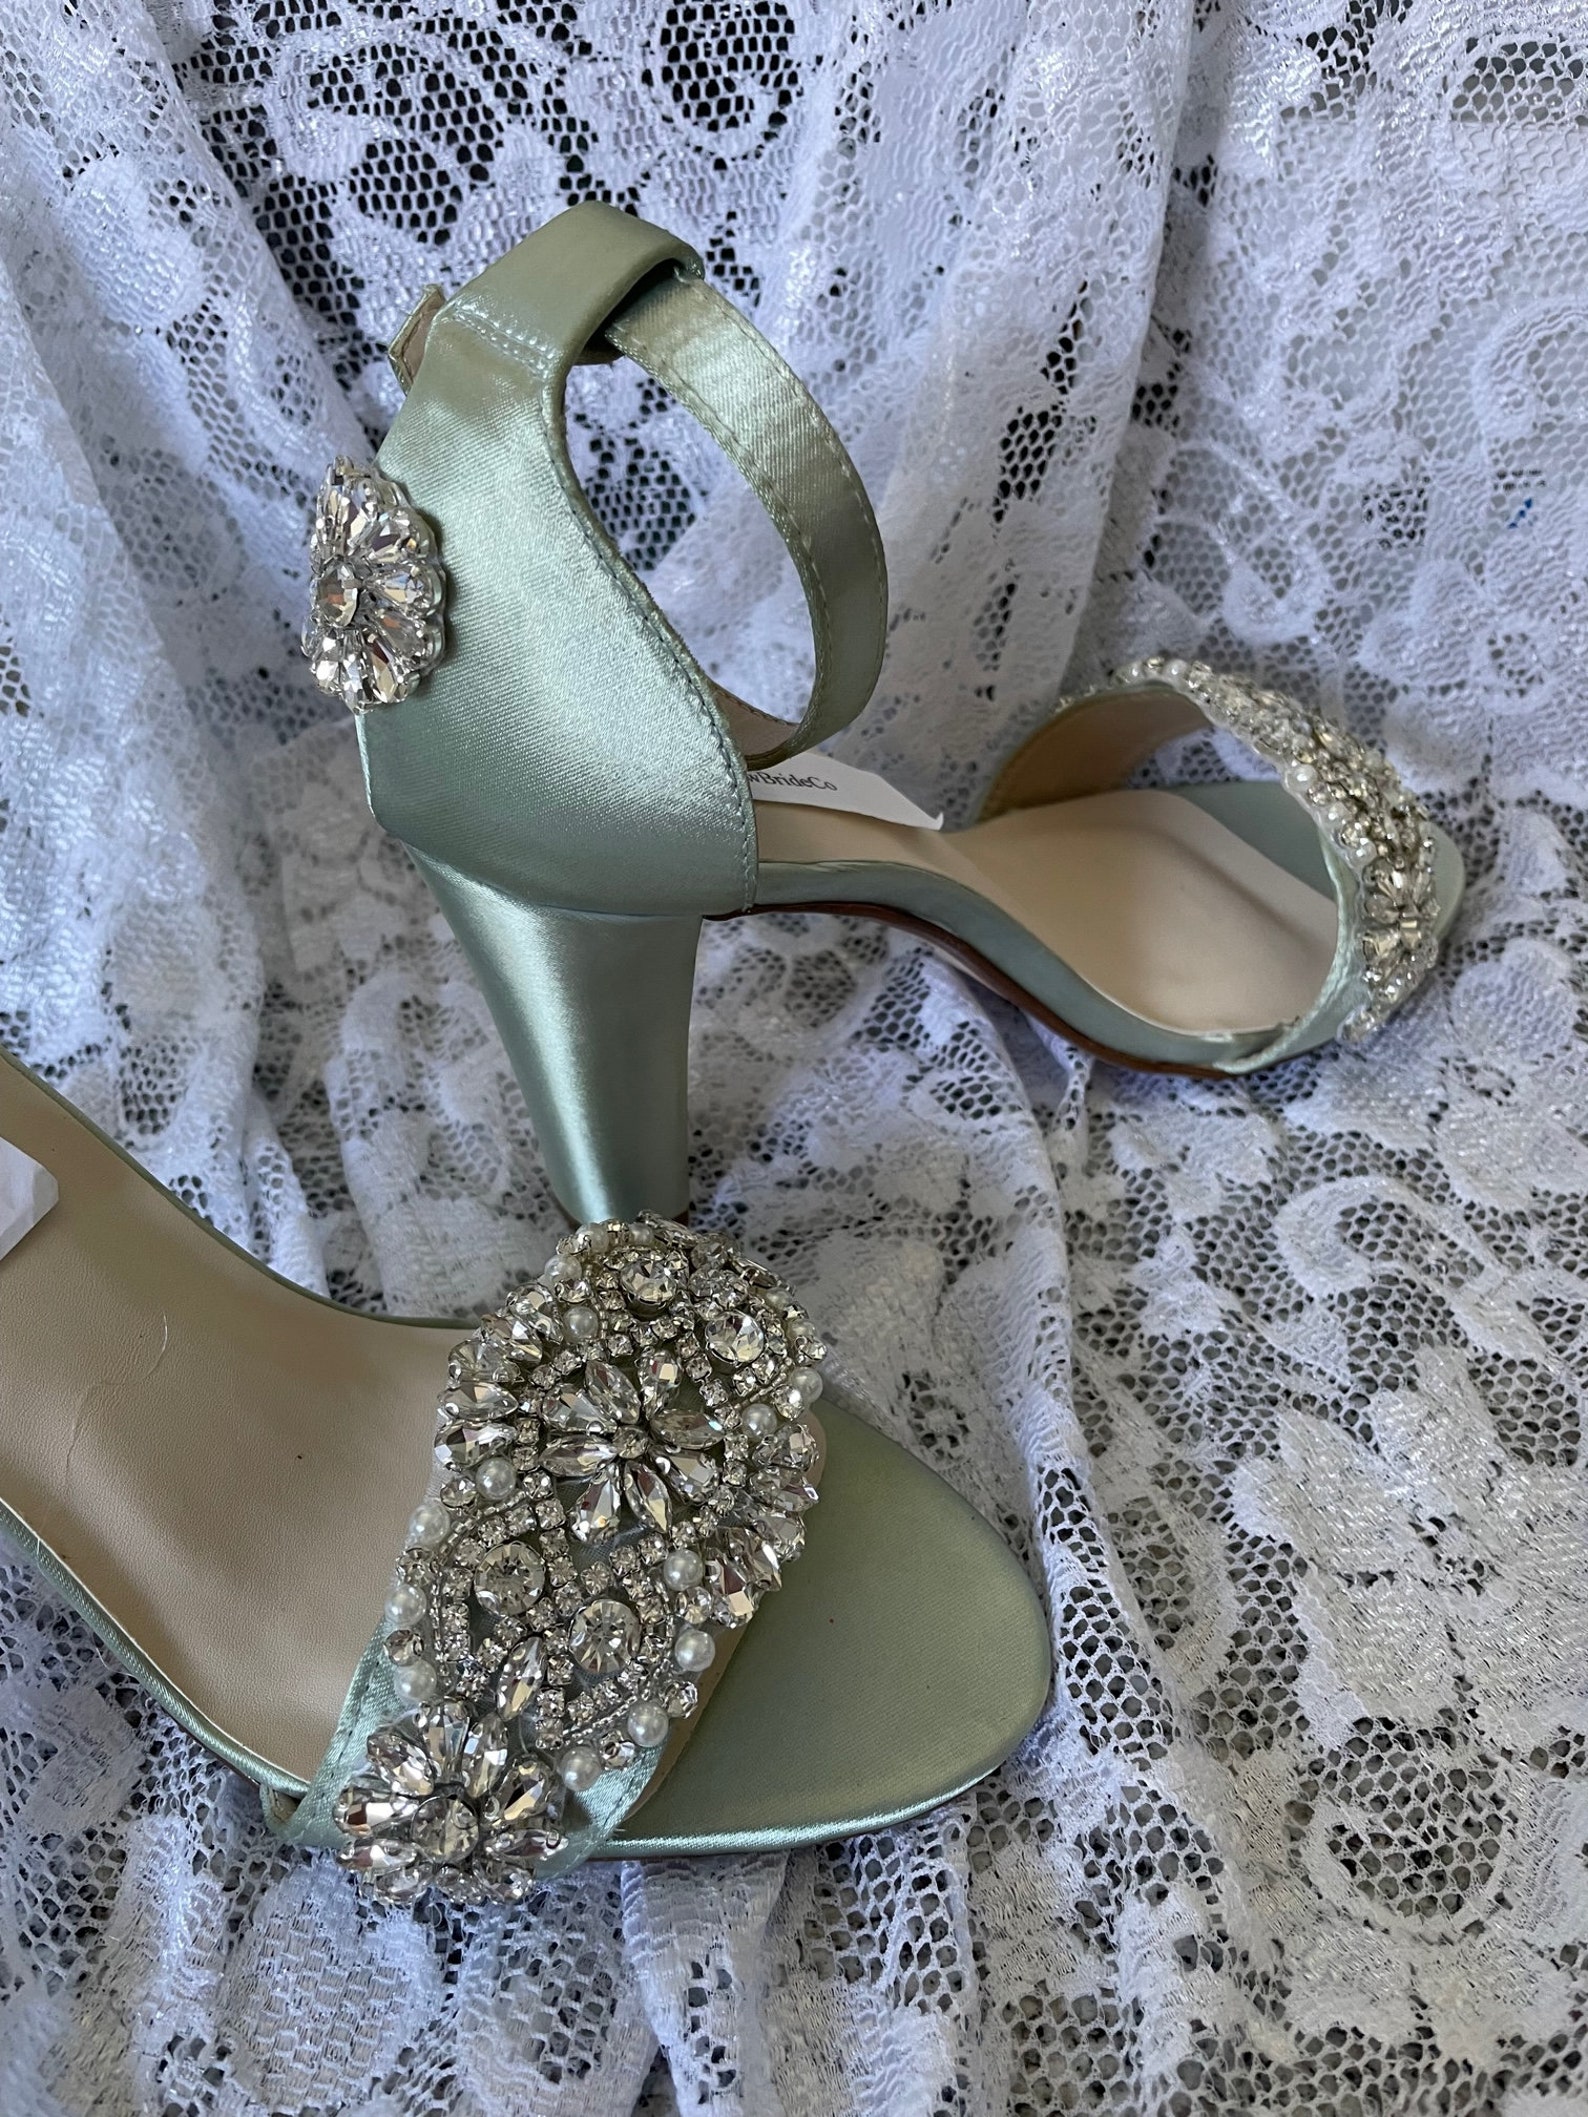 SAGE Heel Shoes Bling Bridal Thick Heels Trimmed With Lots of - Etsy